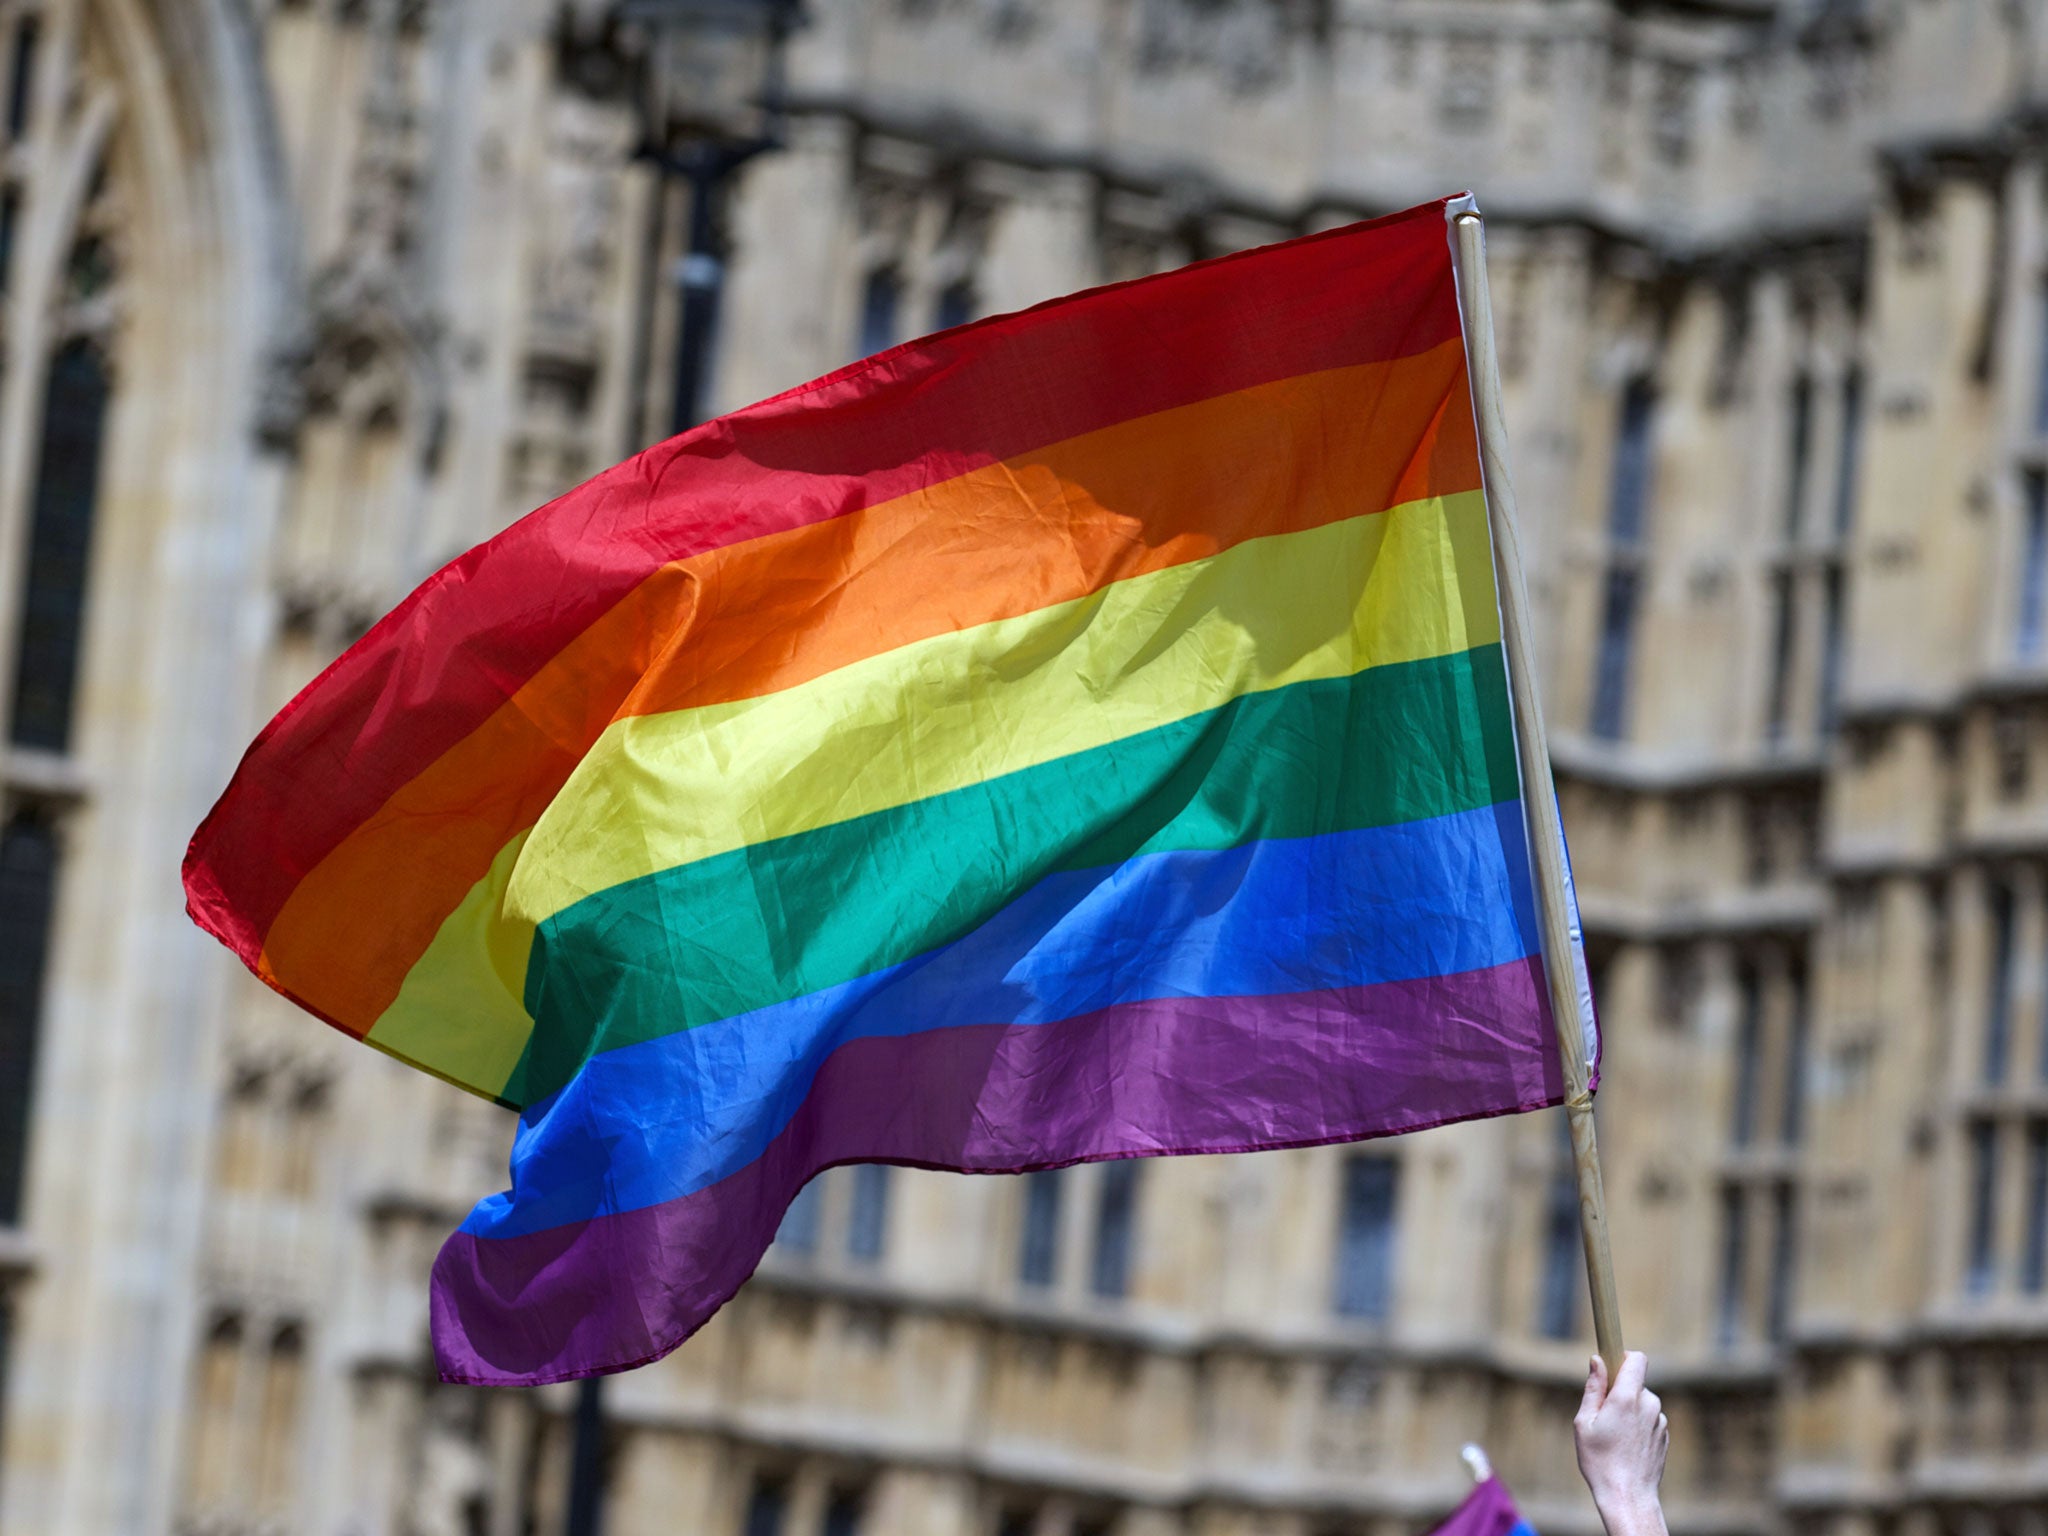 16 per cent of Britons think gay sex should be illegal - but this proportion has declined since 2008